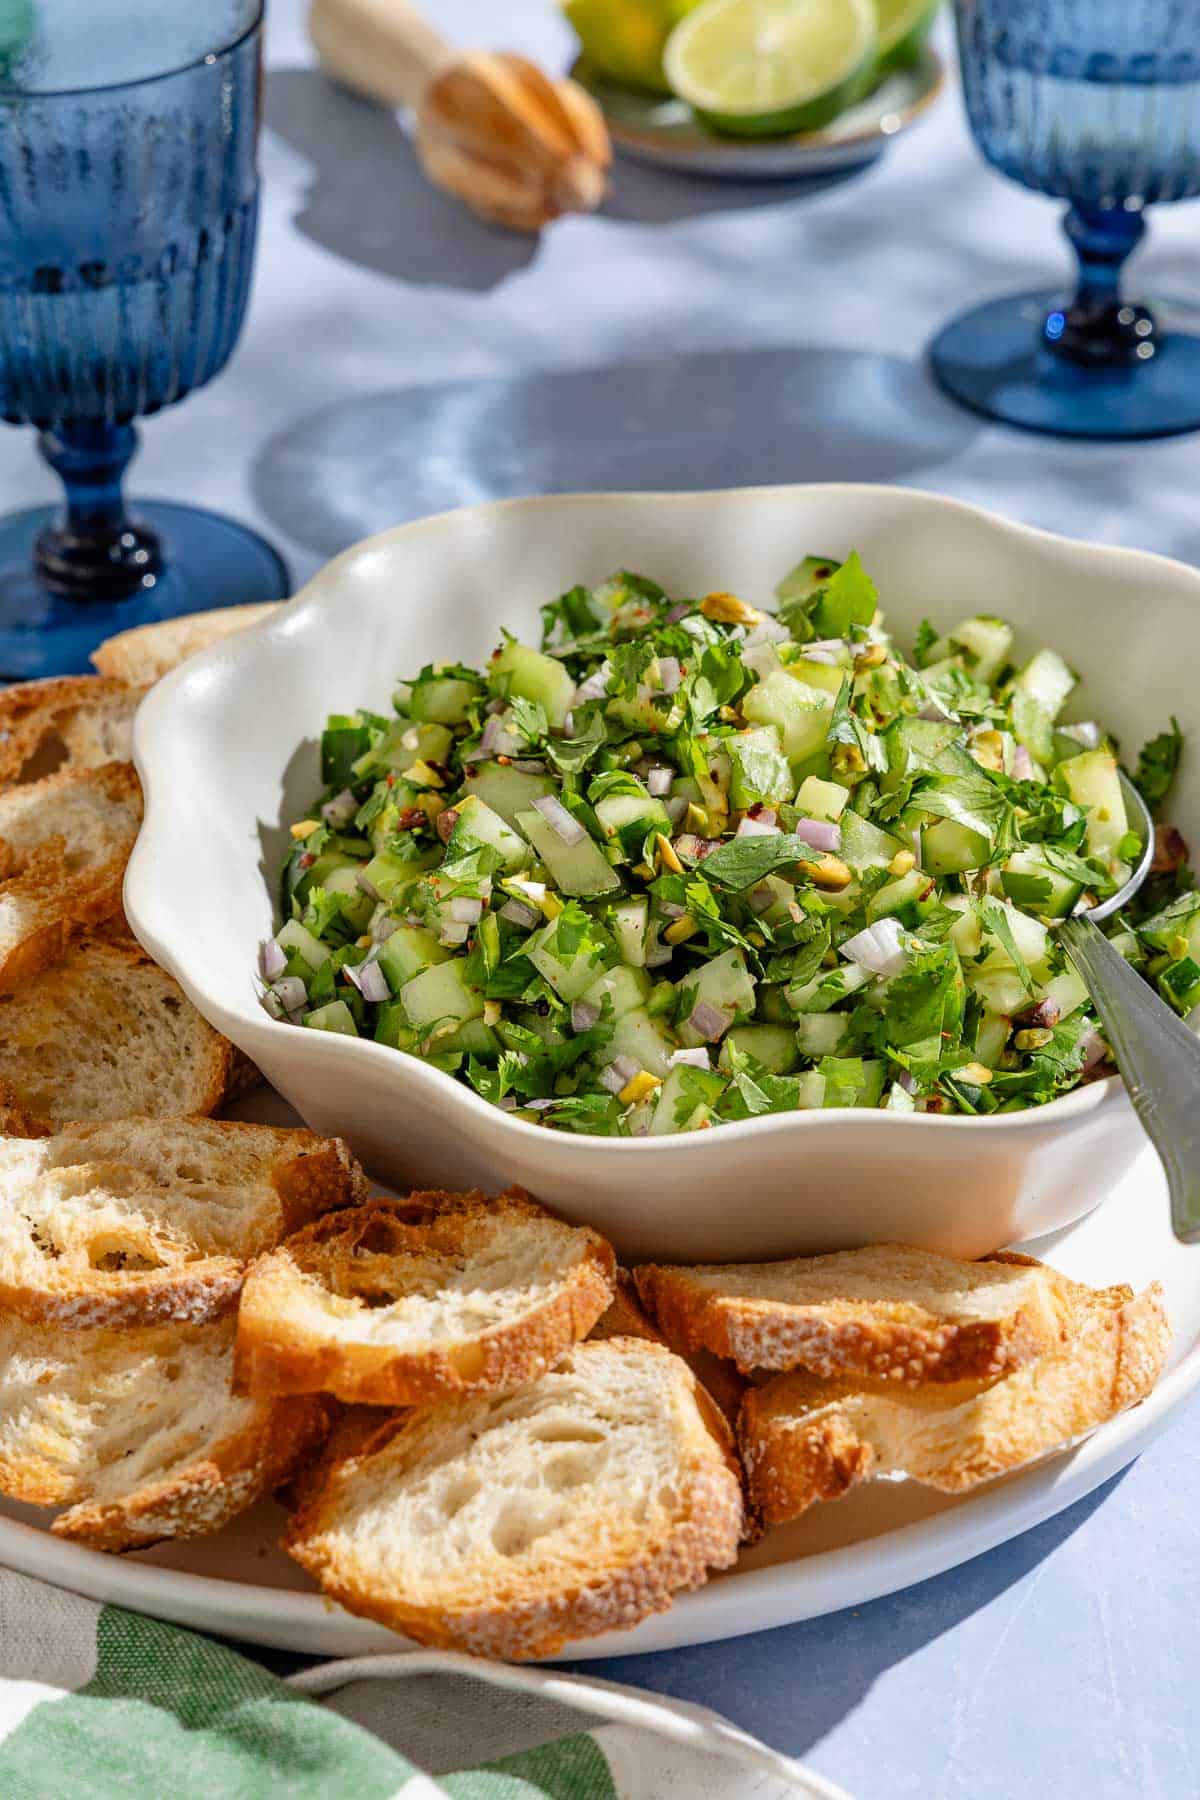 Cucumber salsa in a bowl with a spoon on a platter with slices of toasted baguette. Next to this is a kitchen towel, a plate of limes and two glasses of water.